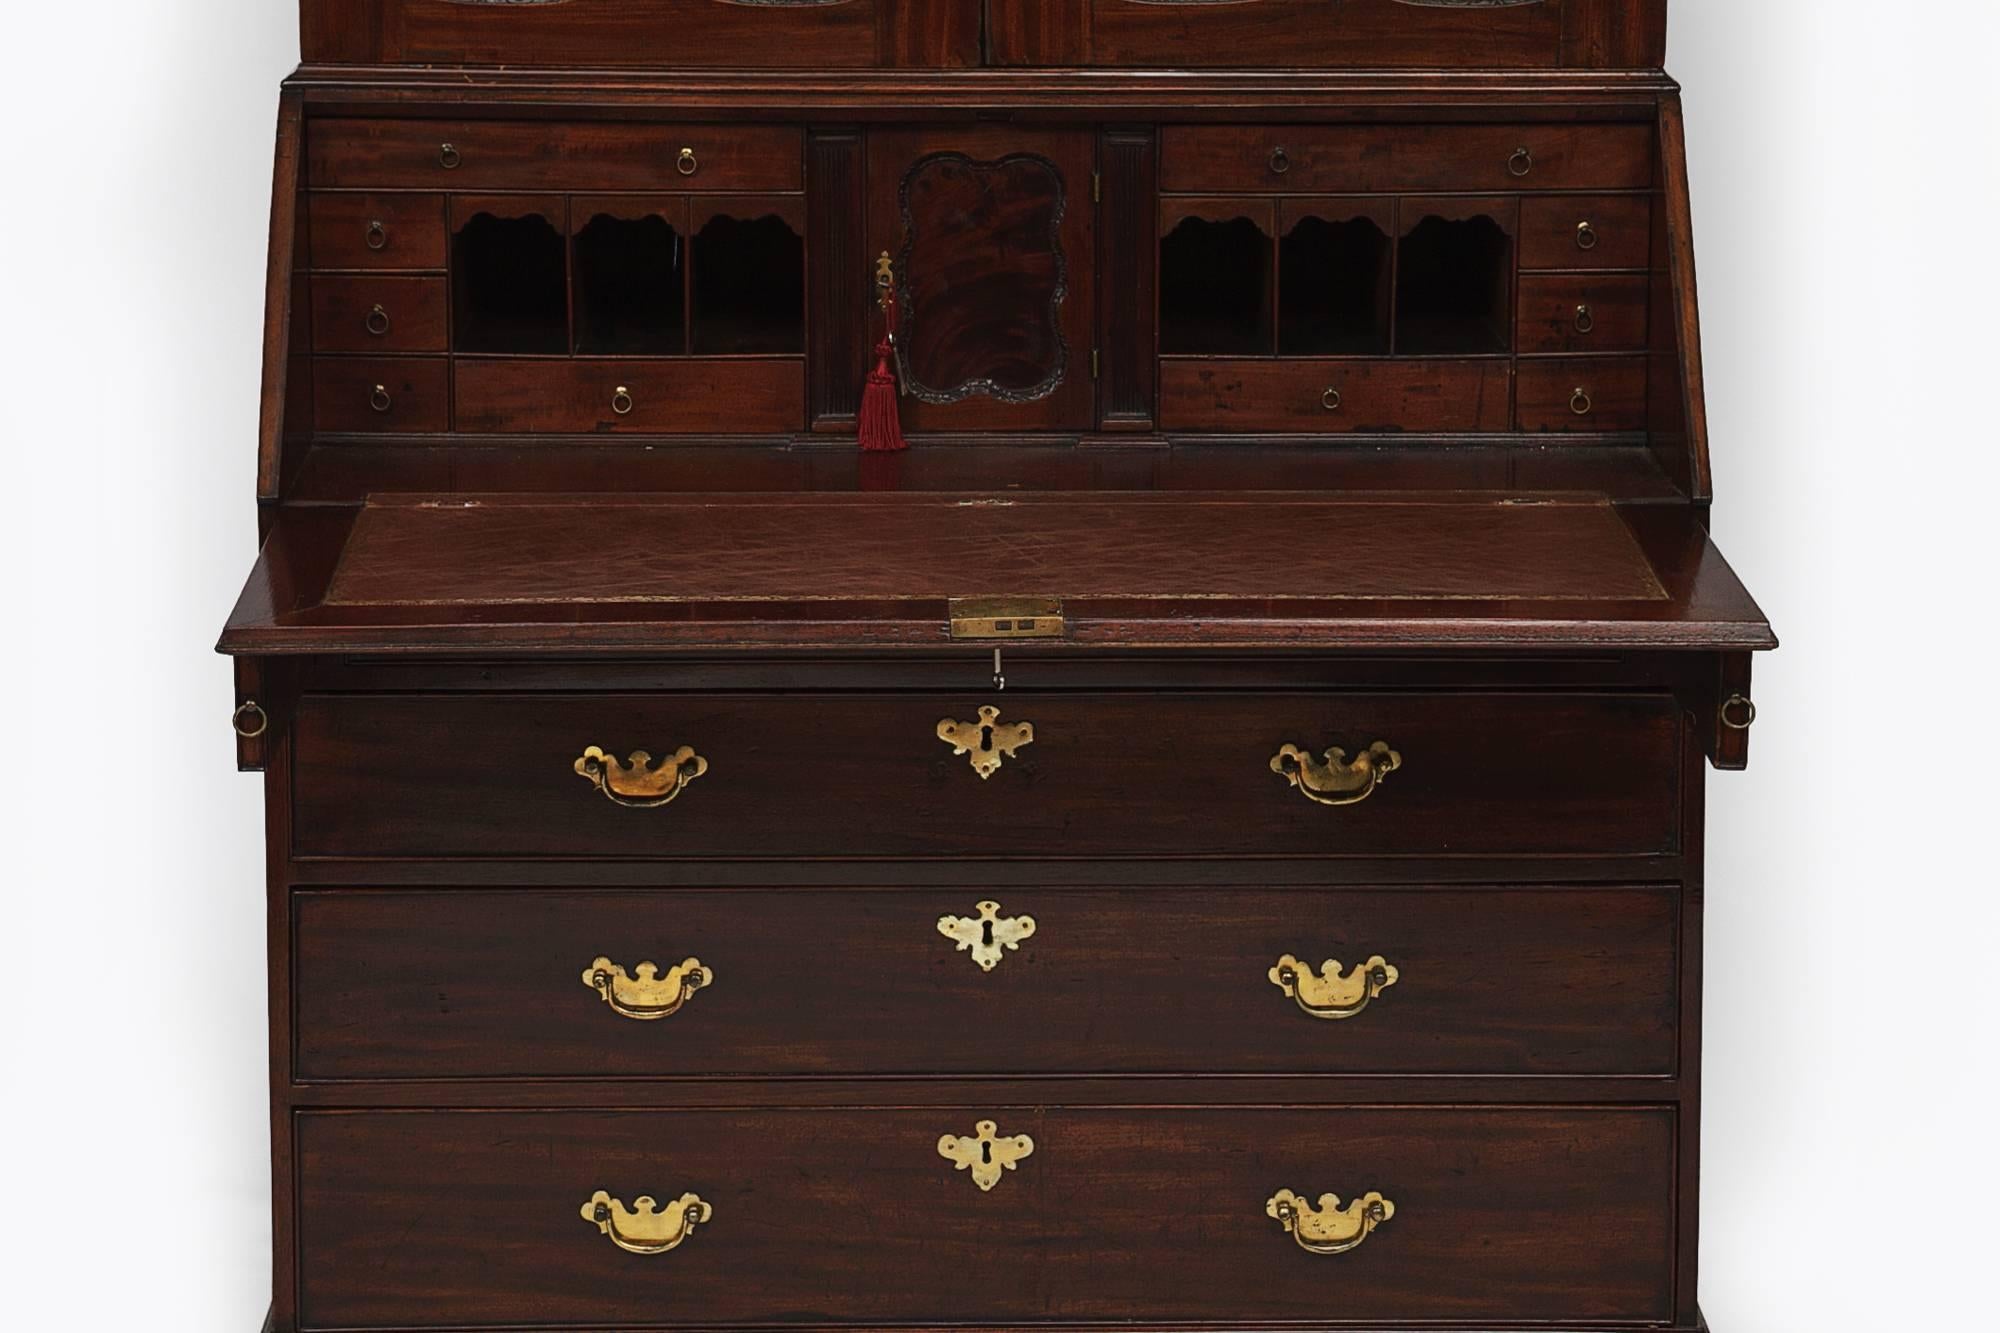 18th century George II Bureau bookcase with mirrored doors. The stepped cornice above two mirrored doors opening to reveal shelving above slope front secretaire with fitted interior, above four graduated brass handle drawers.